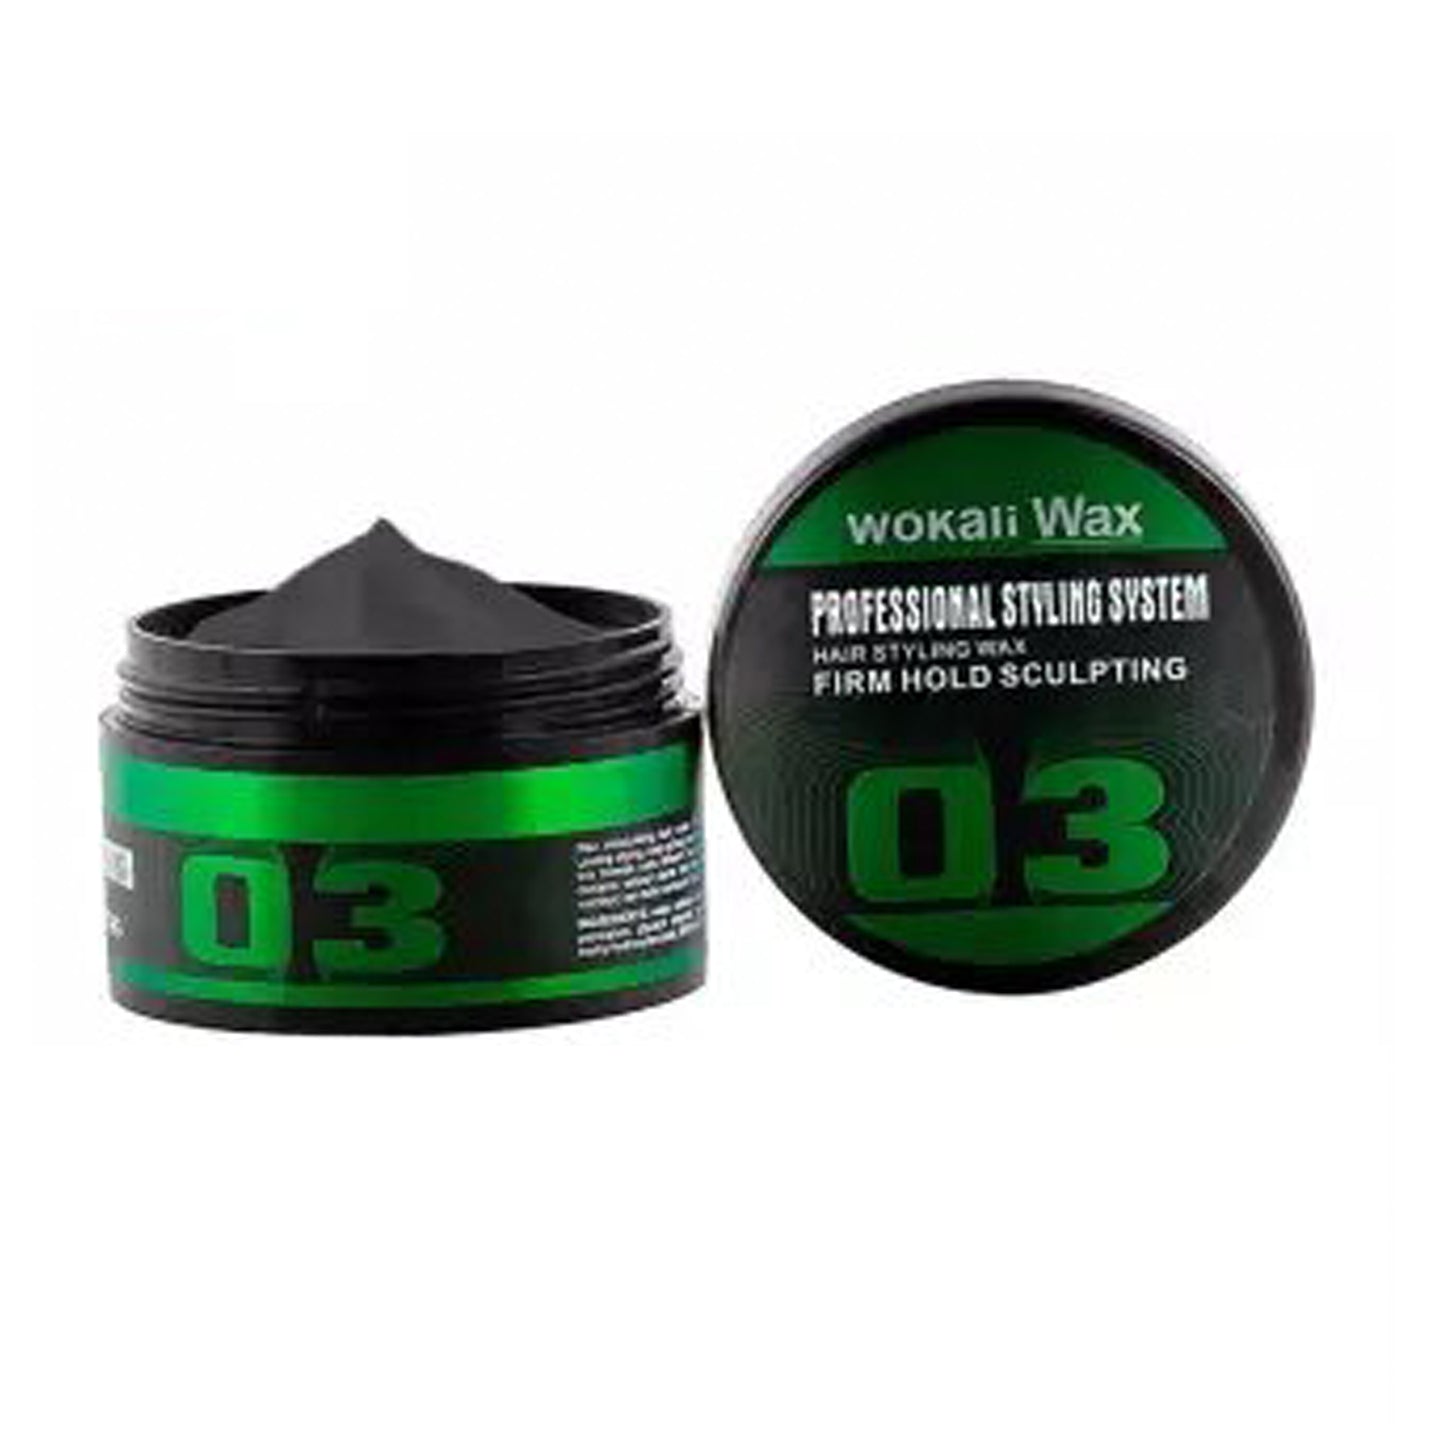 FRUIT OF THE WOKALI - FIRM HOLD SCULPTING HAIR STYLING WAX - 150G